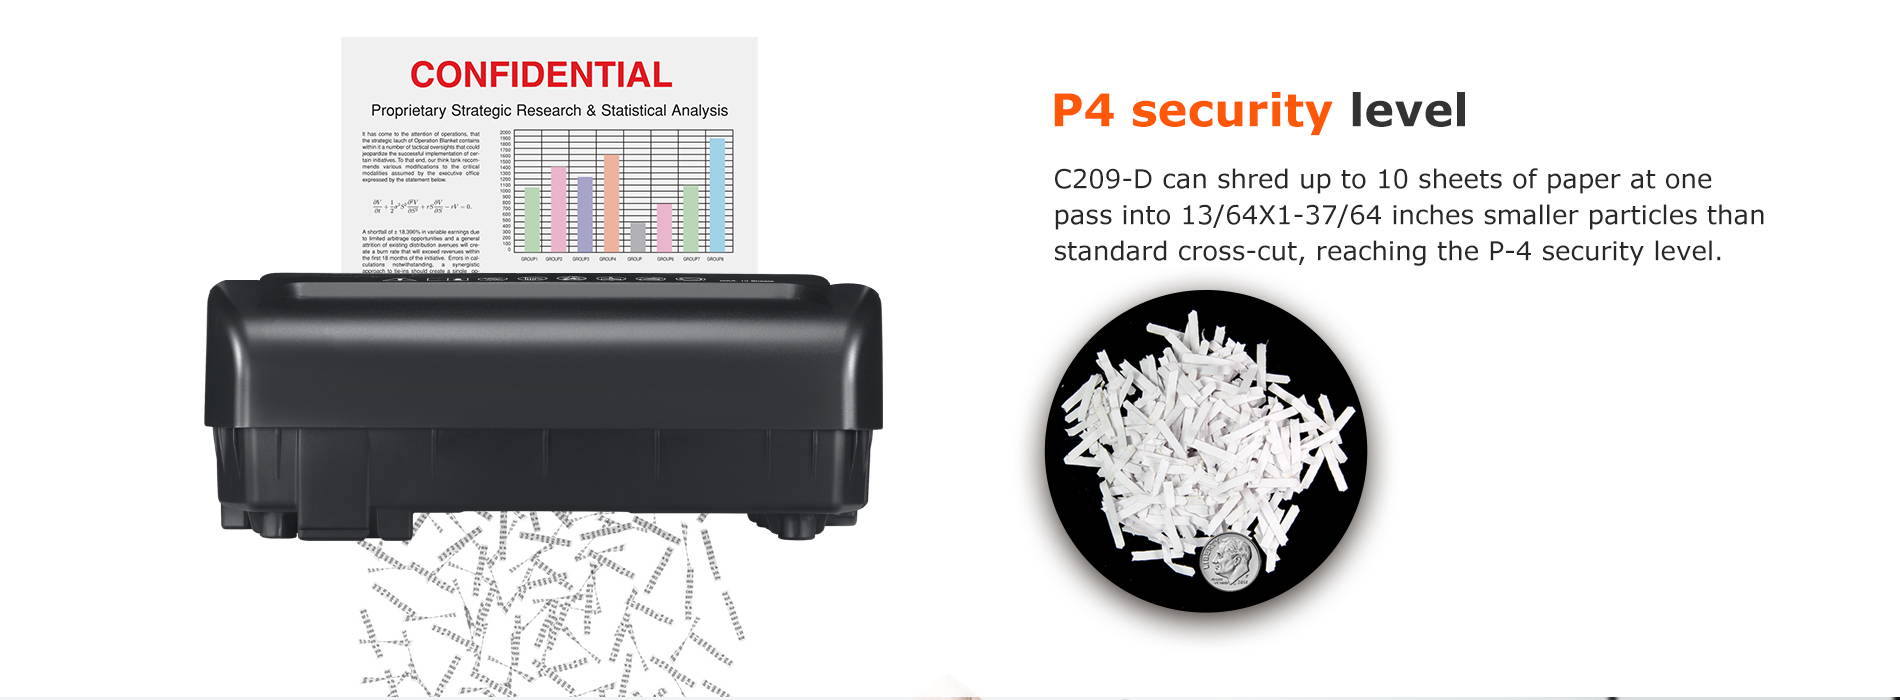 P4 security level C209-D can shred up to 10 sheets of paper at one pass into 13/64X1-37/64 inches smaller particles than standard cross-cut, reaching the P-4 security level.